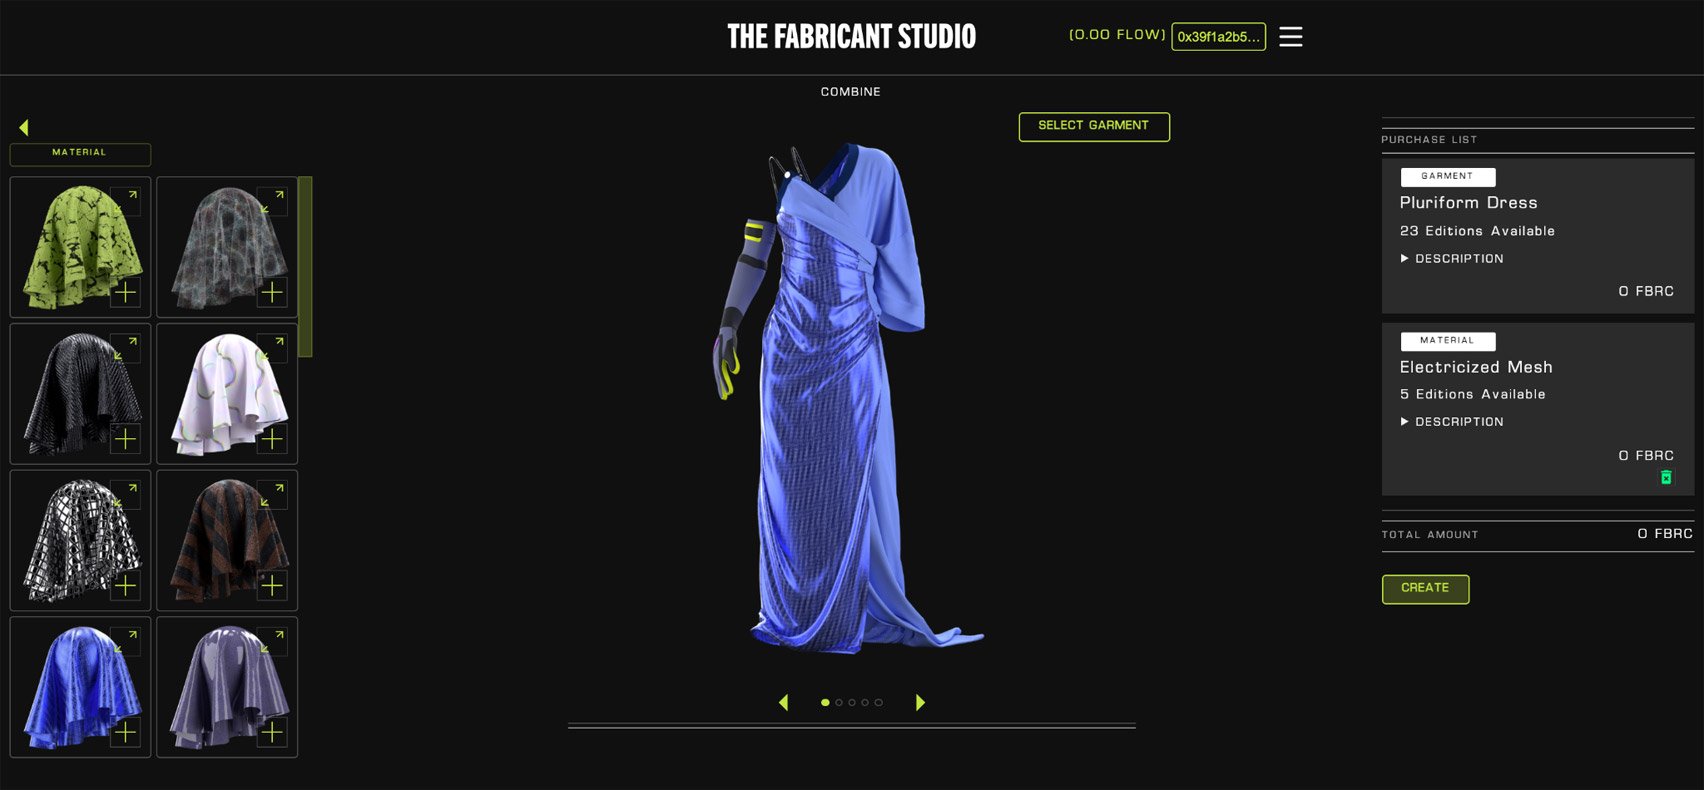 The Fabricant Studio "allows anyone to become a digital fashion designer"